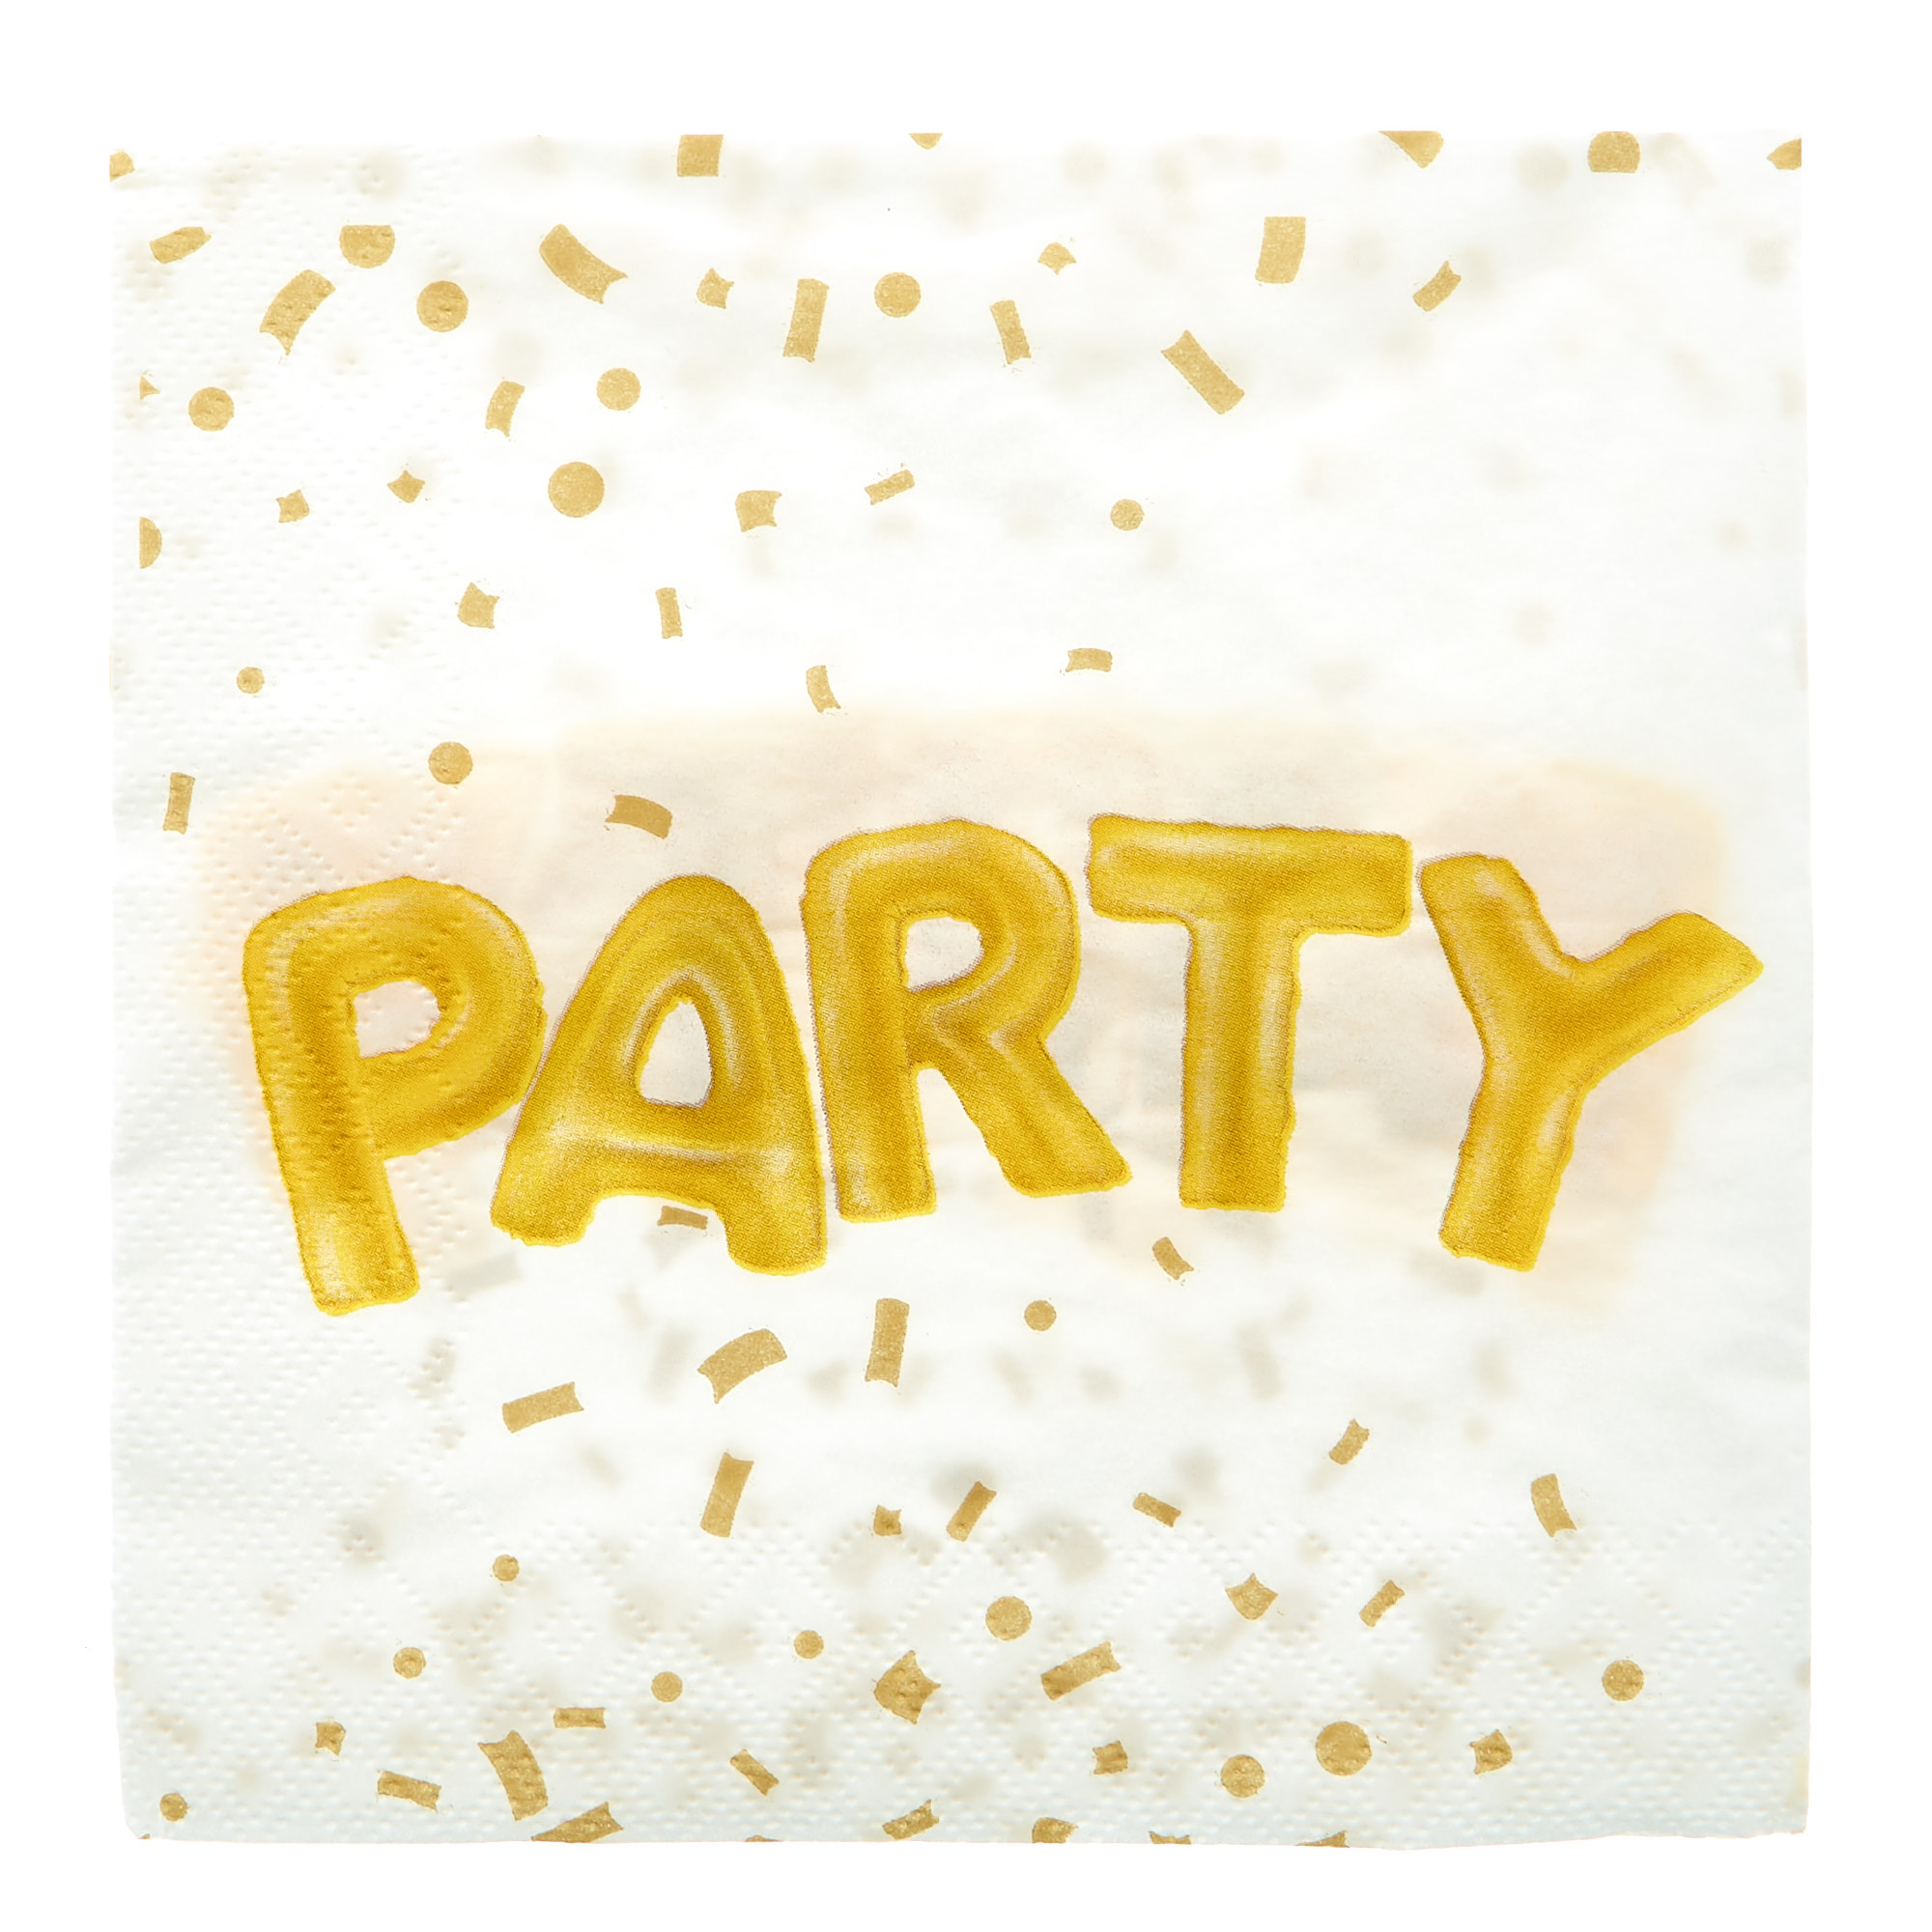 Gold Balloon Letters Party Tableware Bundle - 8 Guests